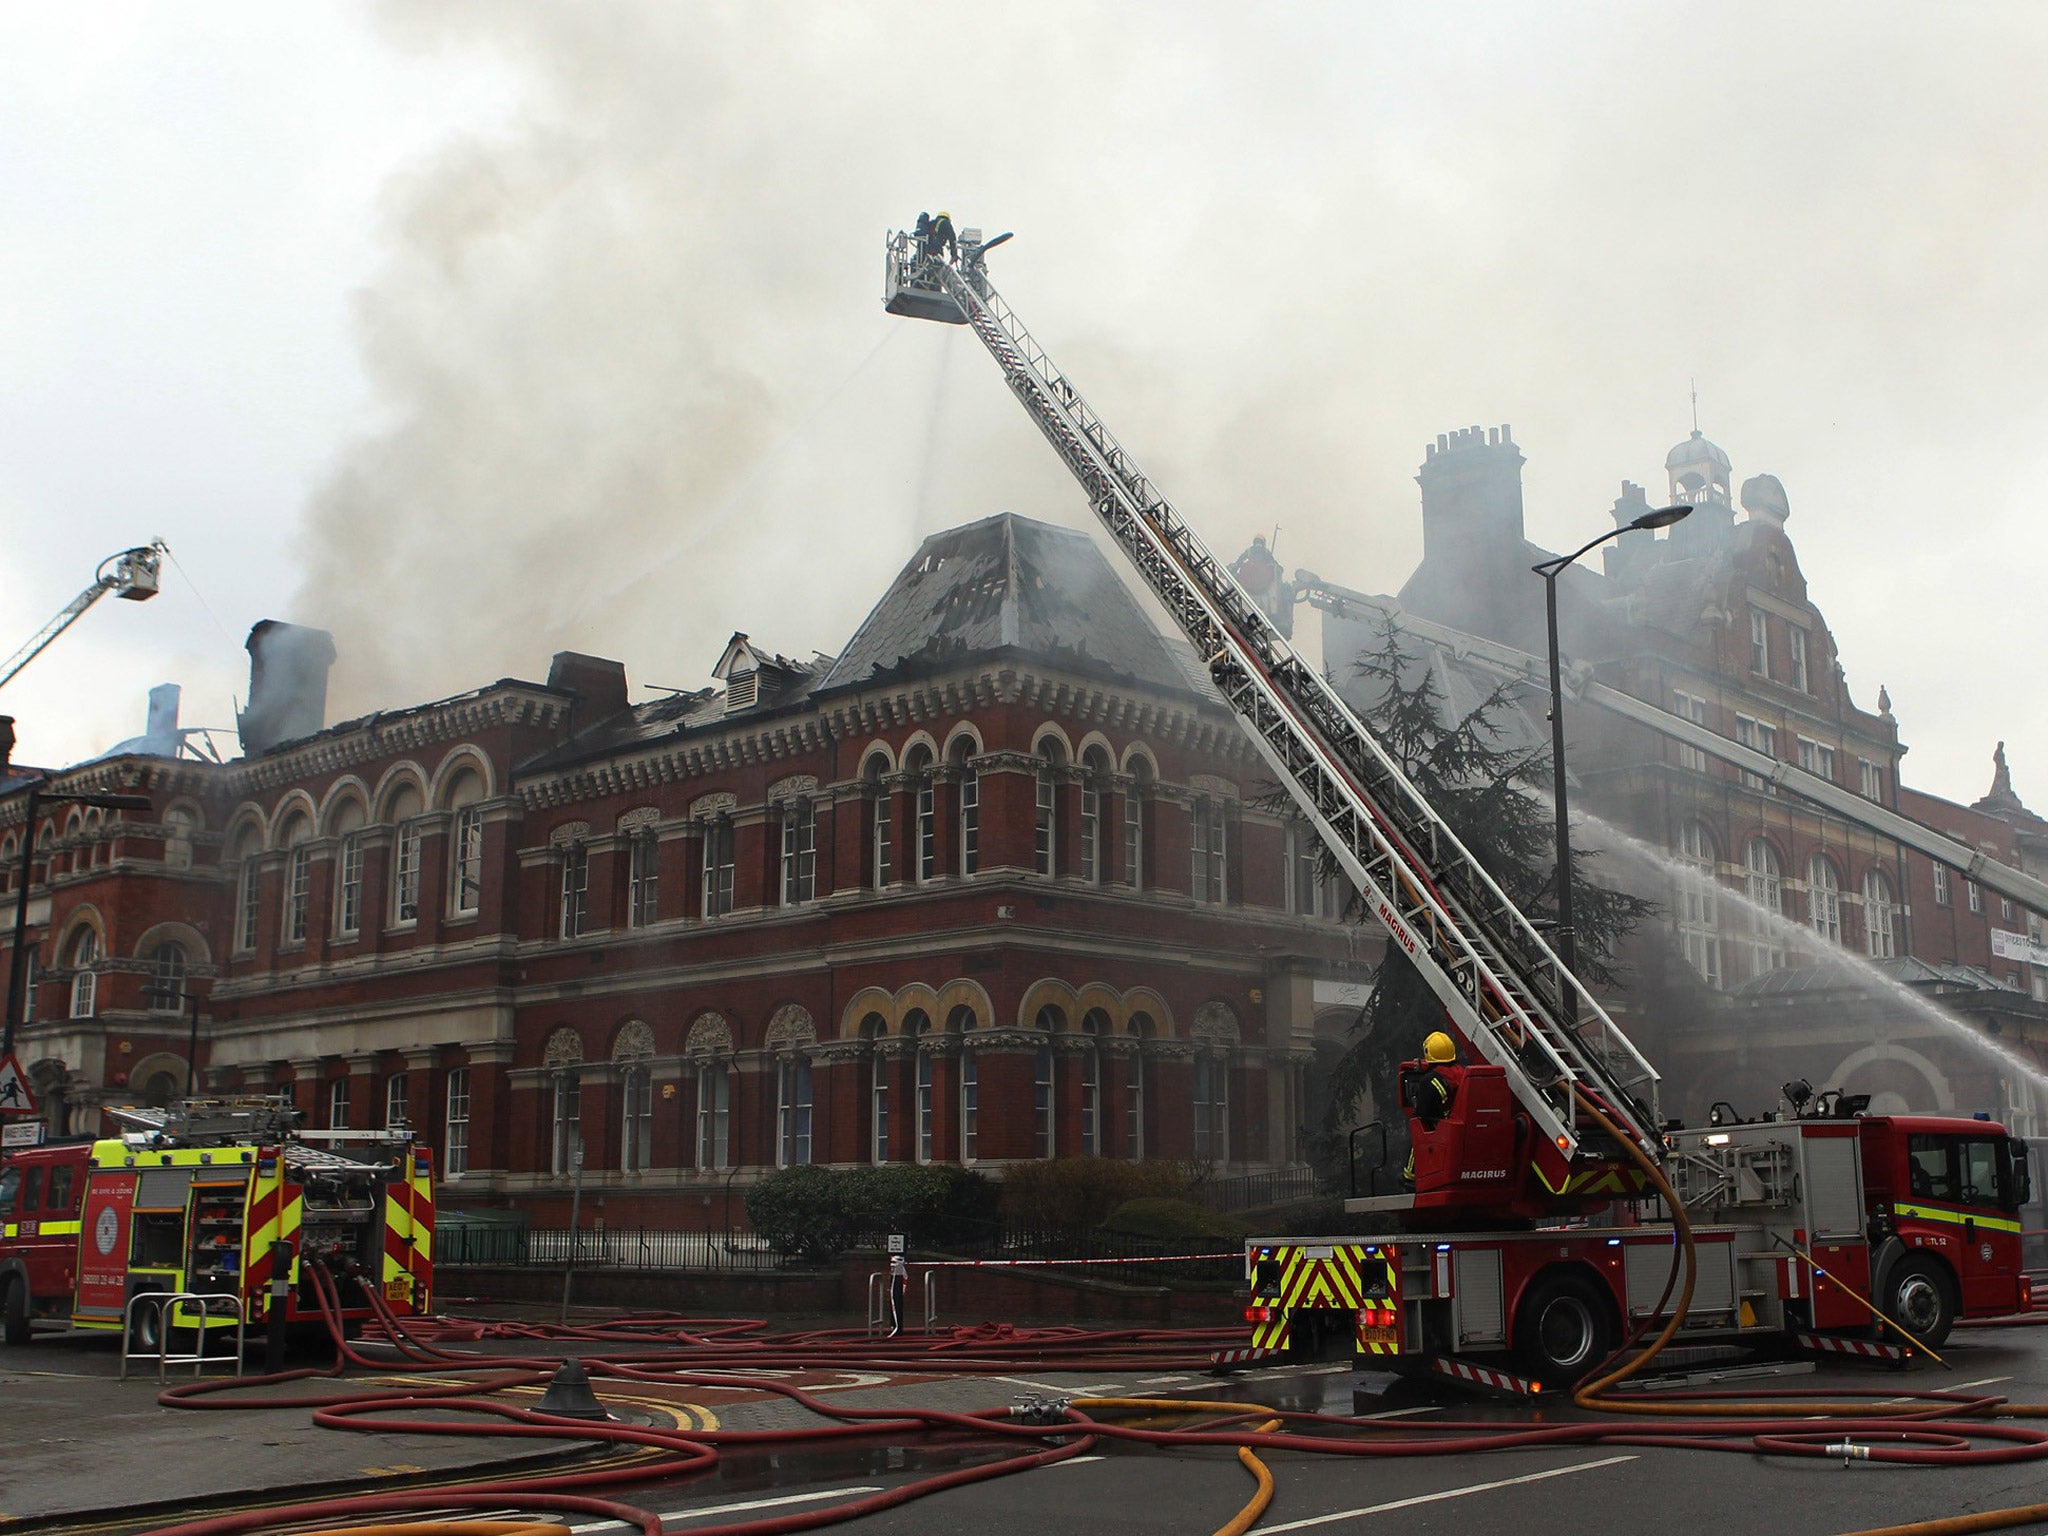 The roof of the Cuming Museum in Southwark on fire